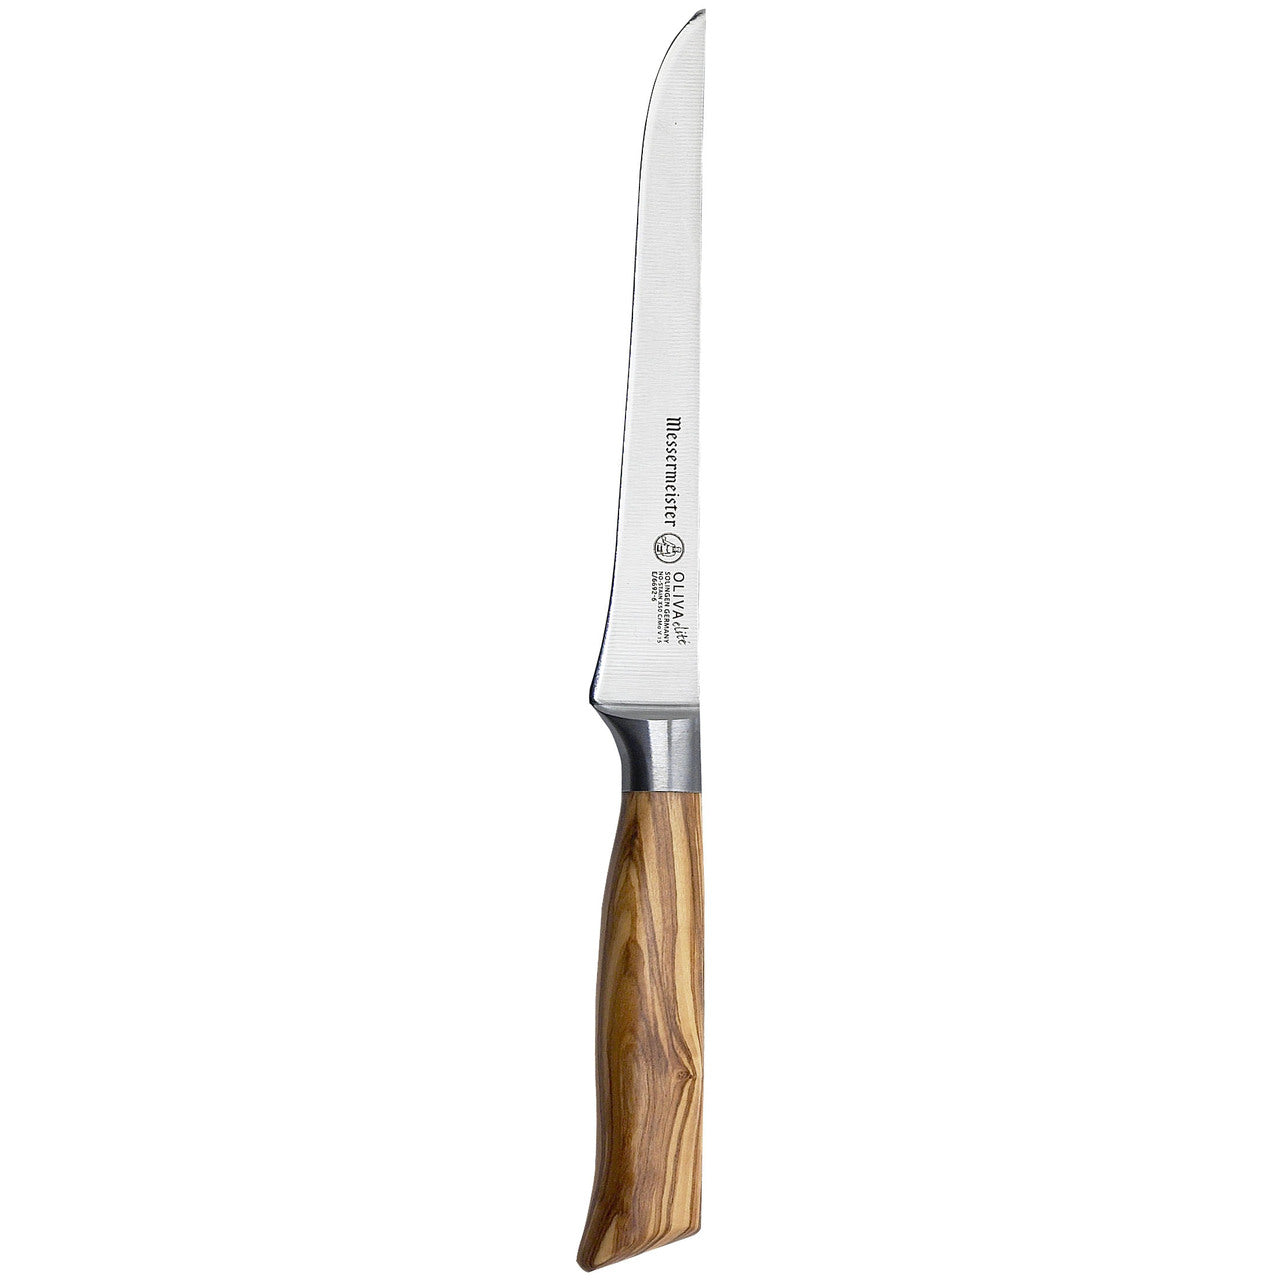 BEON.COM.AU E6692 6         Oliva Elite 6 Inch Boning Knife The Messermeister Oliva Elité 6” Boning Knife is an essential knife for butchers designed to remove bones from meat, poultry and game. The tapered, pointed blade provides excellent control and precision for cutting tasks that render maximum yield.  ... Messermeister at BEON.COM.AU